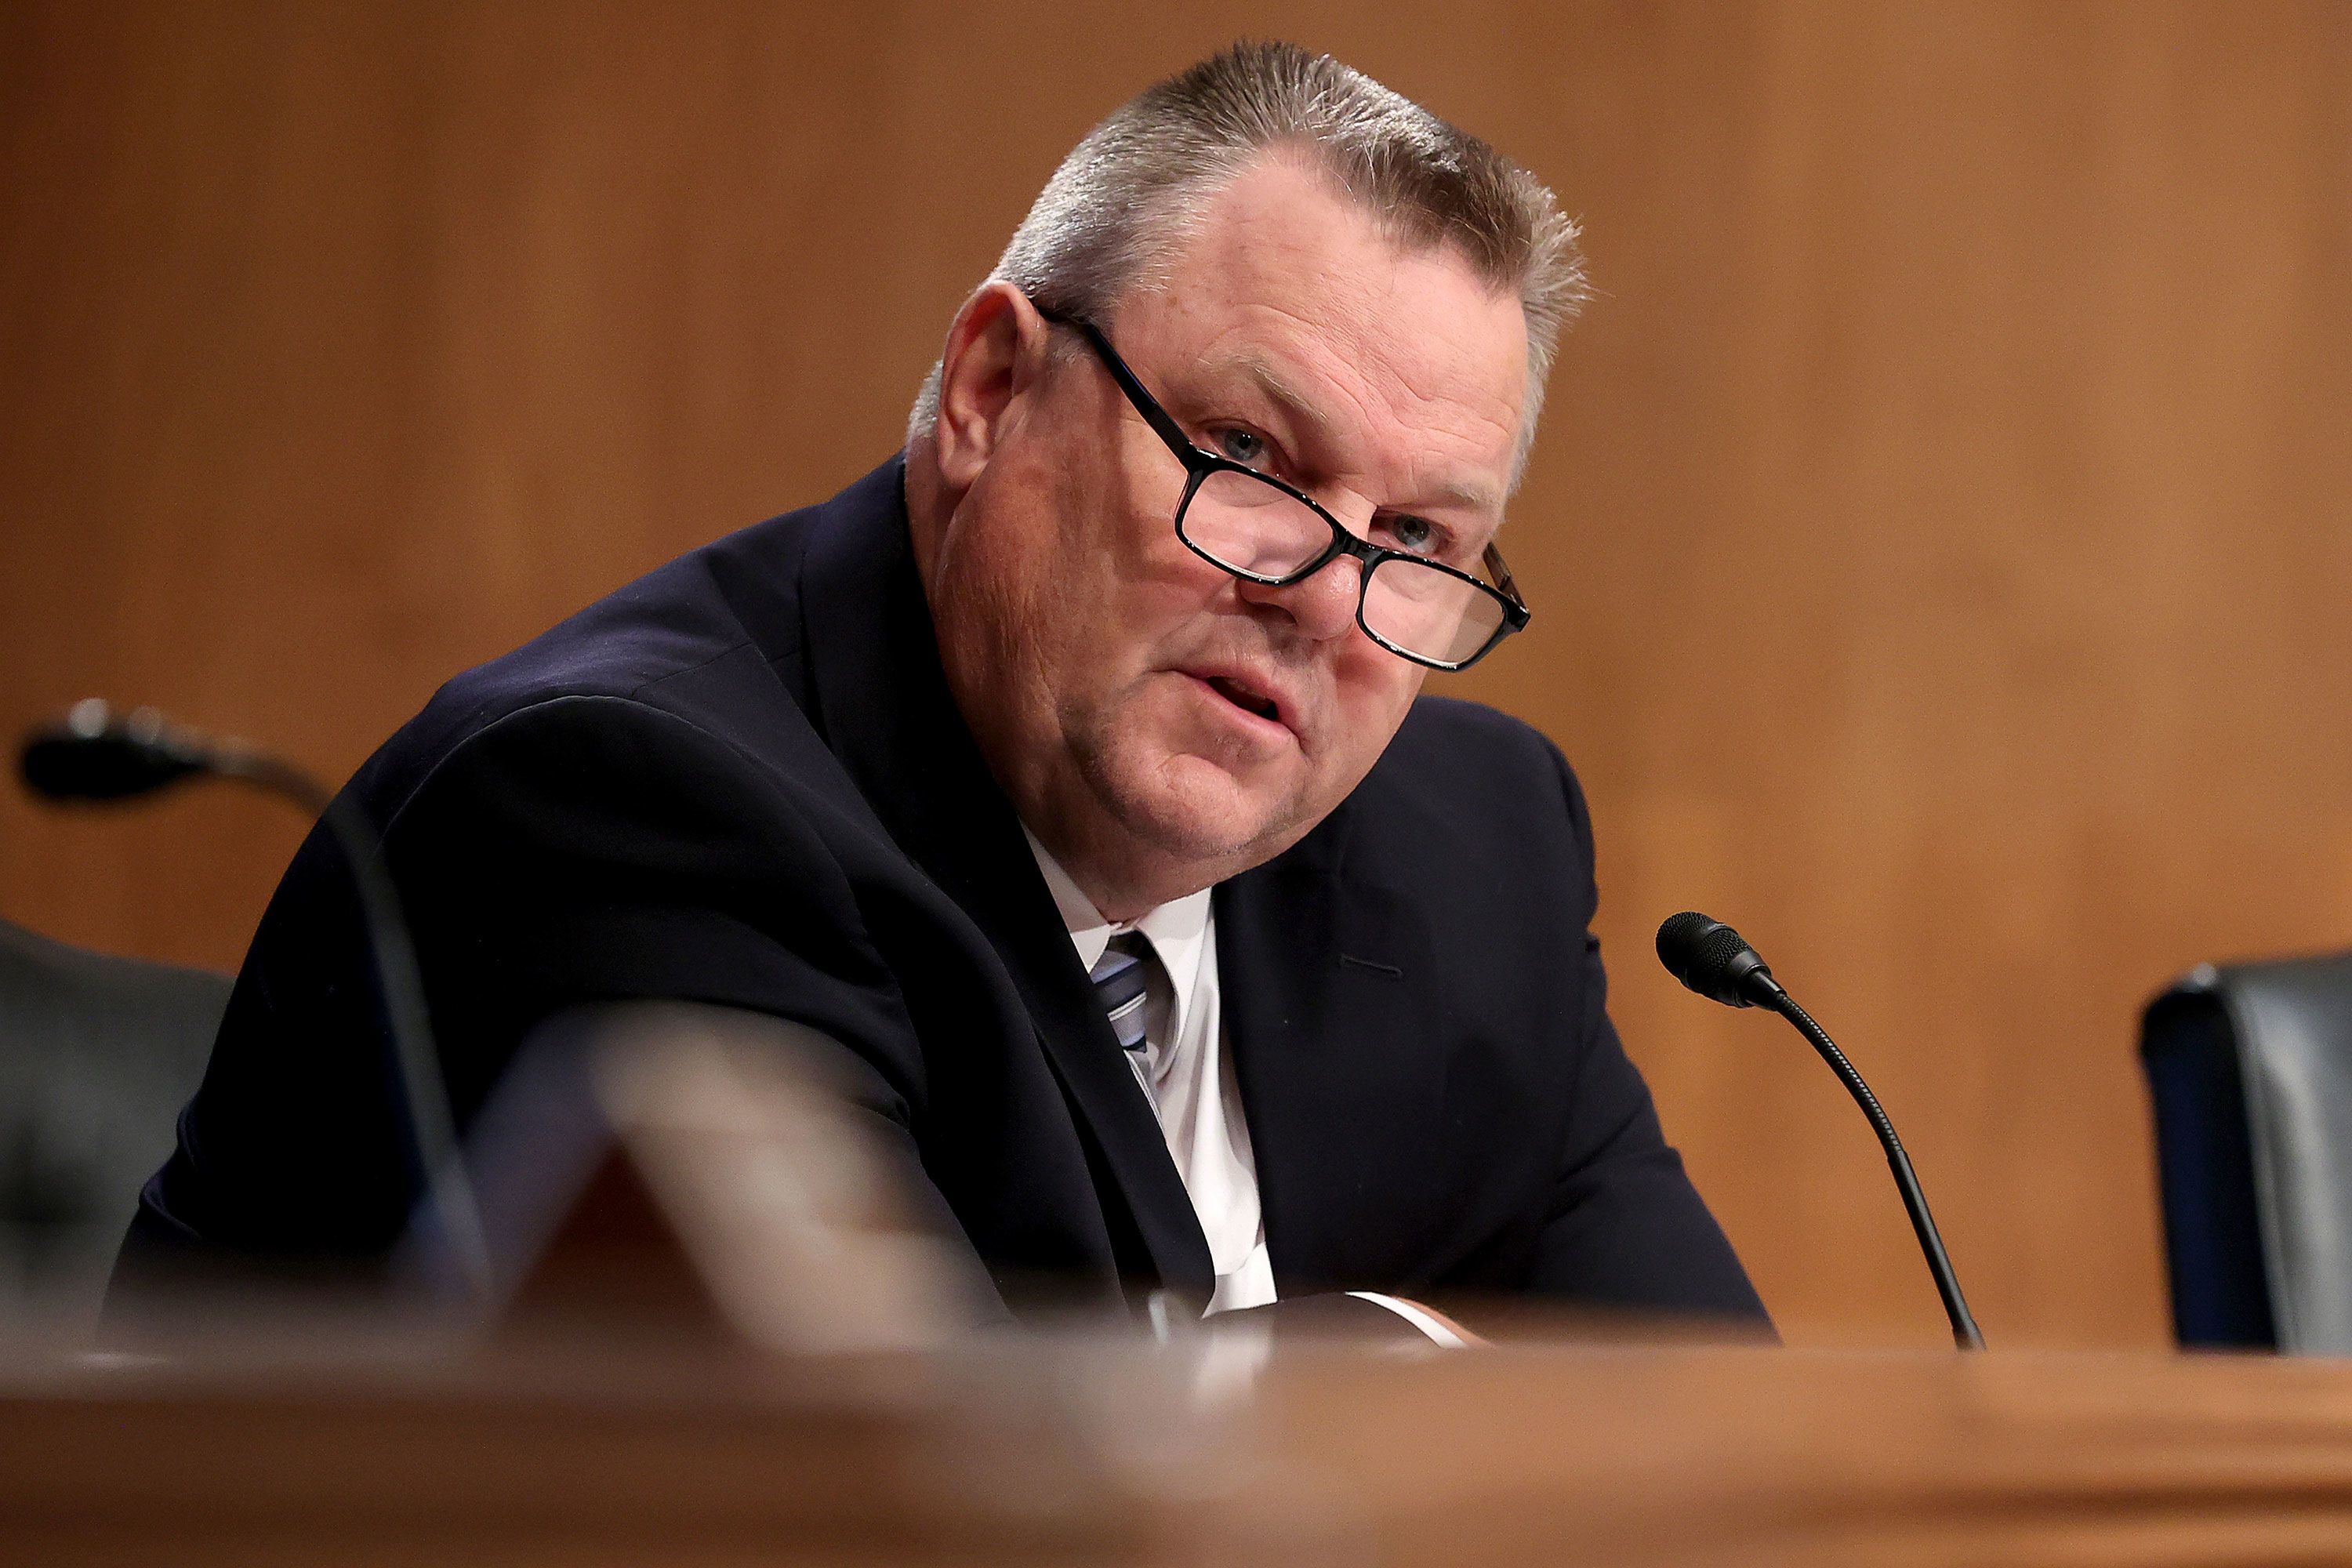 WASHINGTON, DC - AUGUST 05: One of the chief infrastructure negotiators, Sen. Jon Tester (D-MT) questions witnesses during a Senate Homeland Security and Governmental Affairs Committee confirmation hearing in the Dirksen Senate Office Building on Capitol Hill on August 05, 2021 in Washington, DC. Senate Majority Leader Charles Schumer (D-NY) is spurring his colleagues to pass the bipartisan infrastructure bill as senators continue to offer numerous amendments this week. (Photo by Chip Somodevilla/Getty Images)